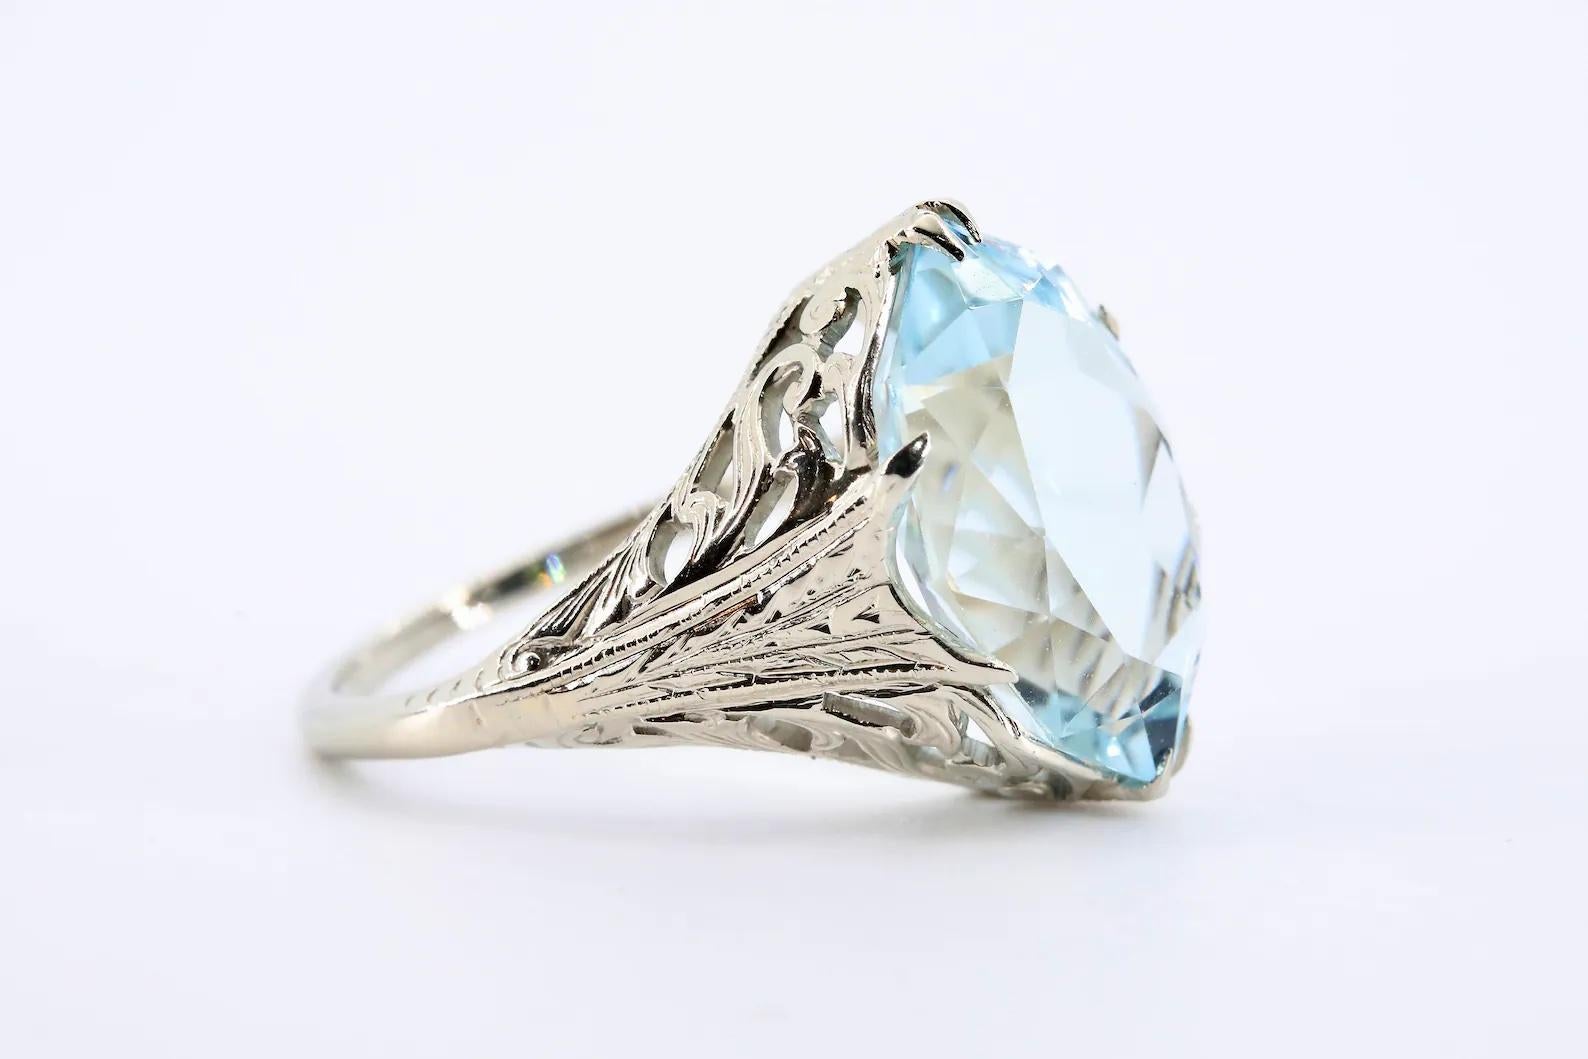 An Art Deco period aquamarine solitaire ring crafted in 20 karat white gold. Centered by a fancy cut aquamarine of 5.00 carats displaying vivid sky blue color, and VVS clarity. 

Embracing the aquamarine, the 20 karat white gold mounting boasts hand